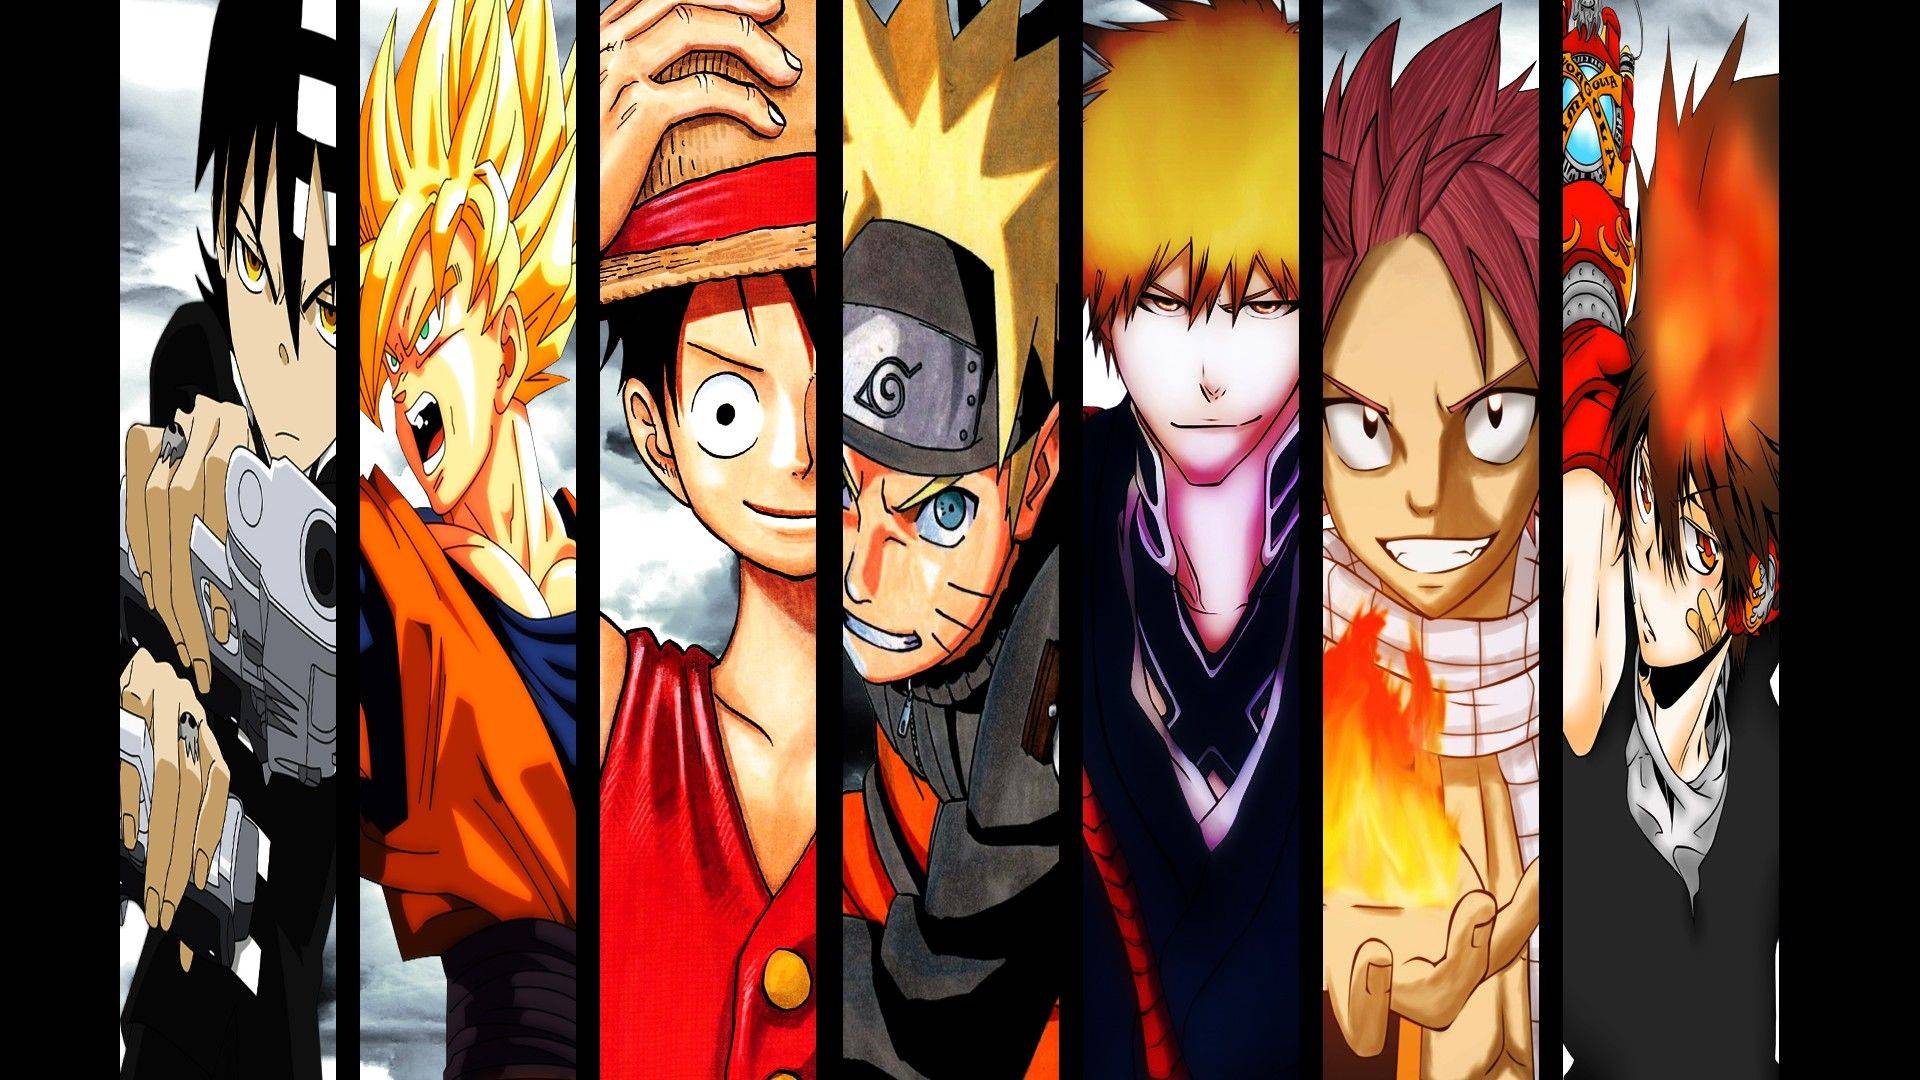 Naruto Bleach One Piece Fairy Tail All in One Wallpaper. Free